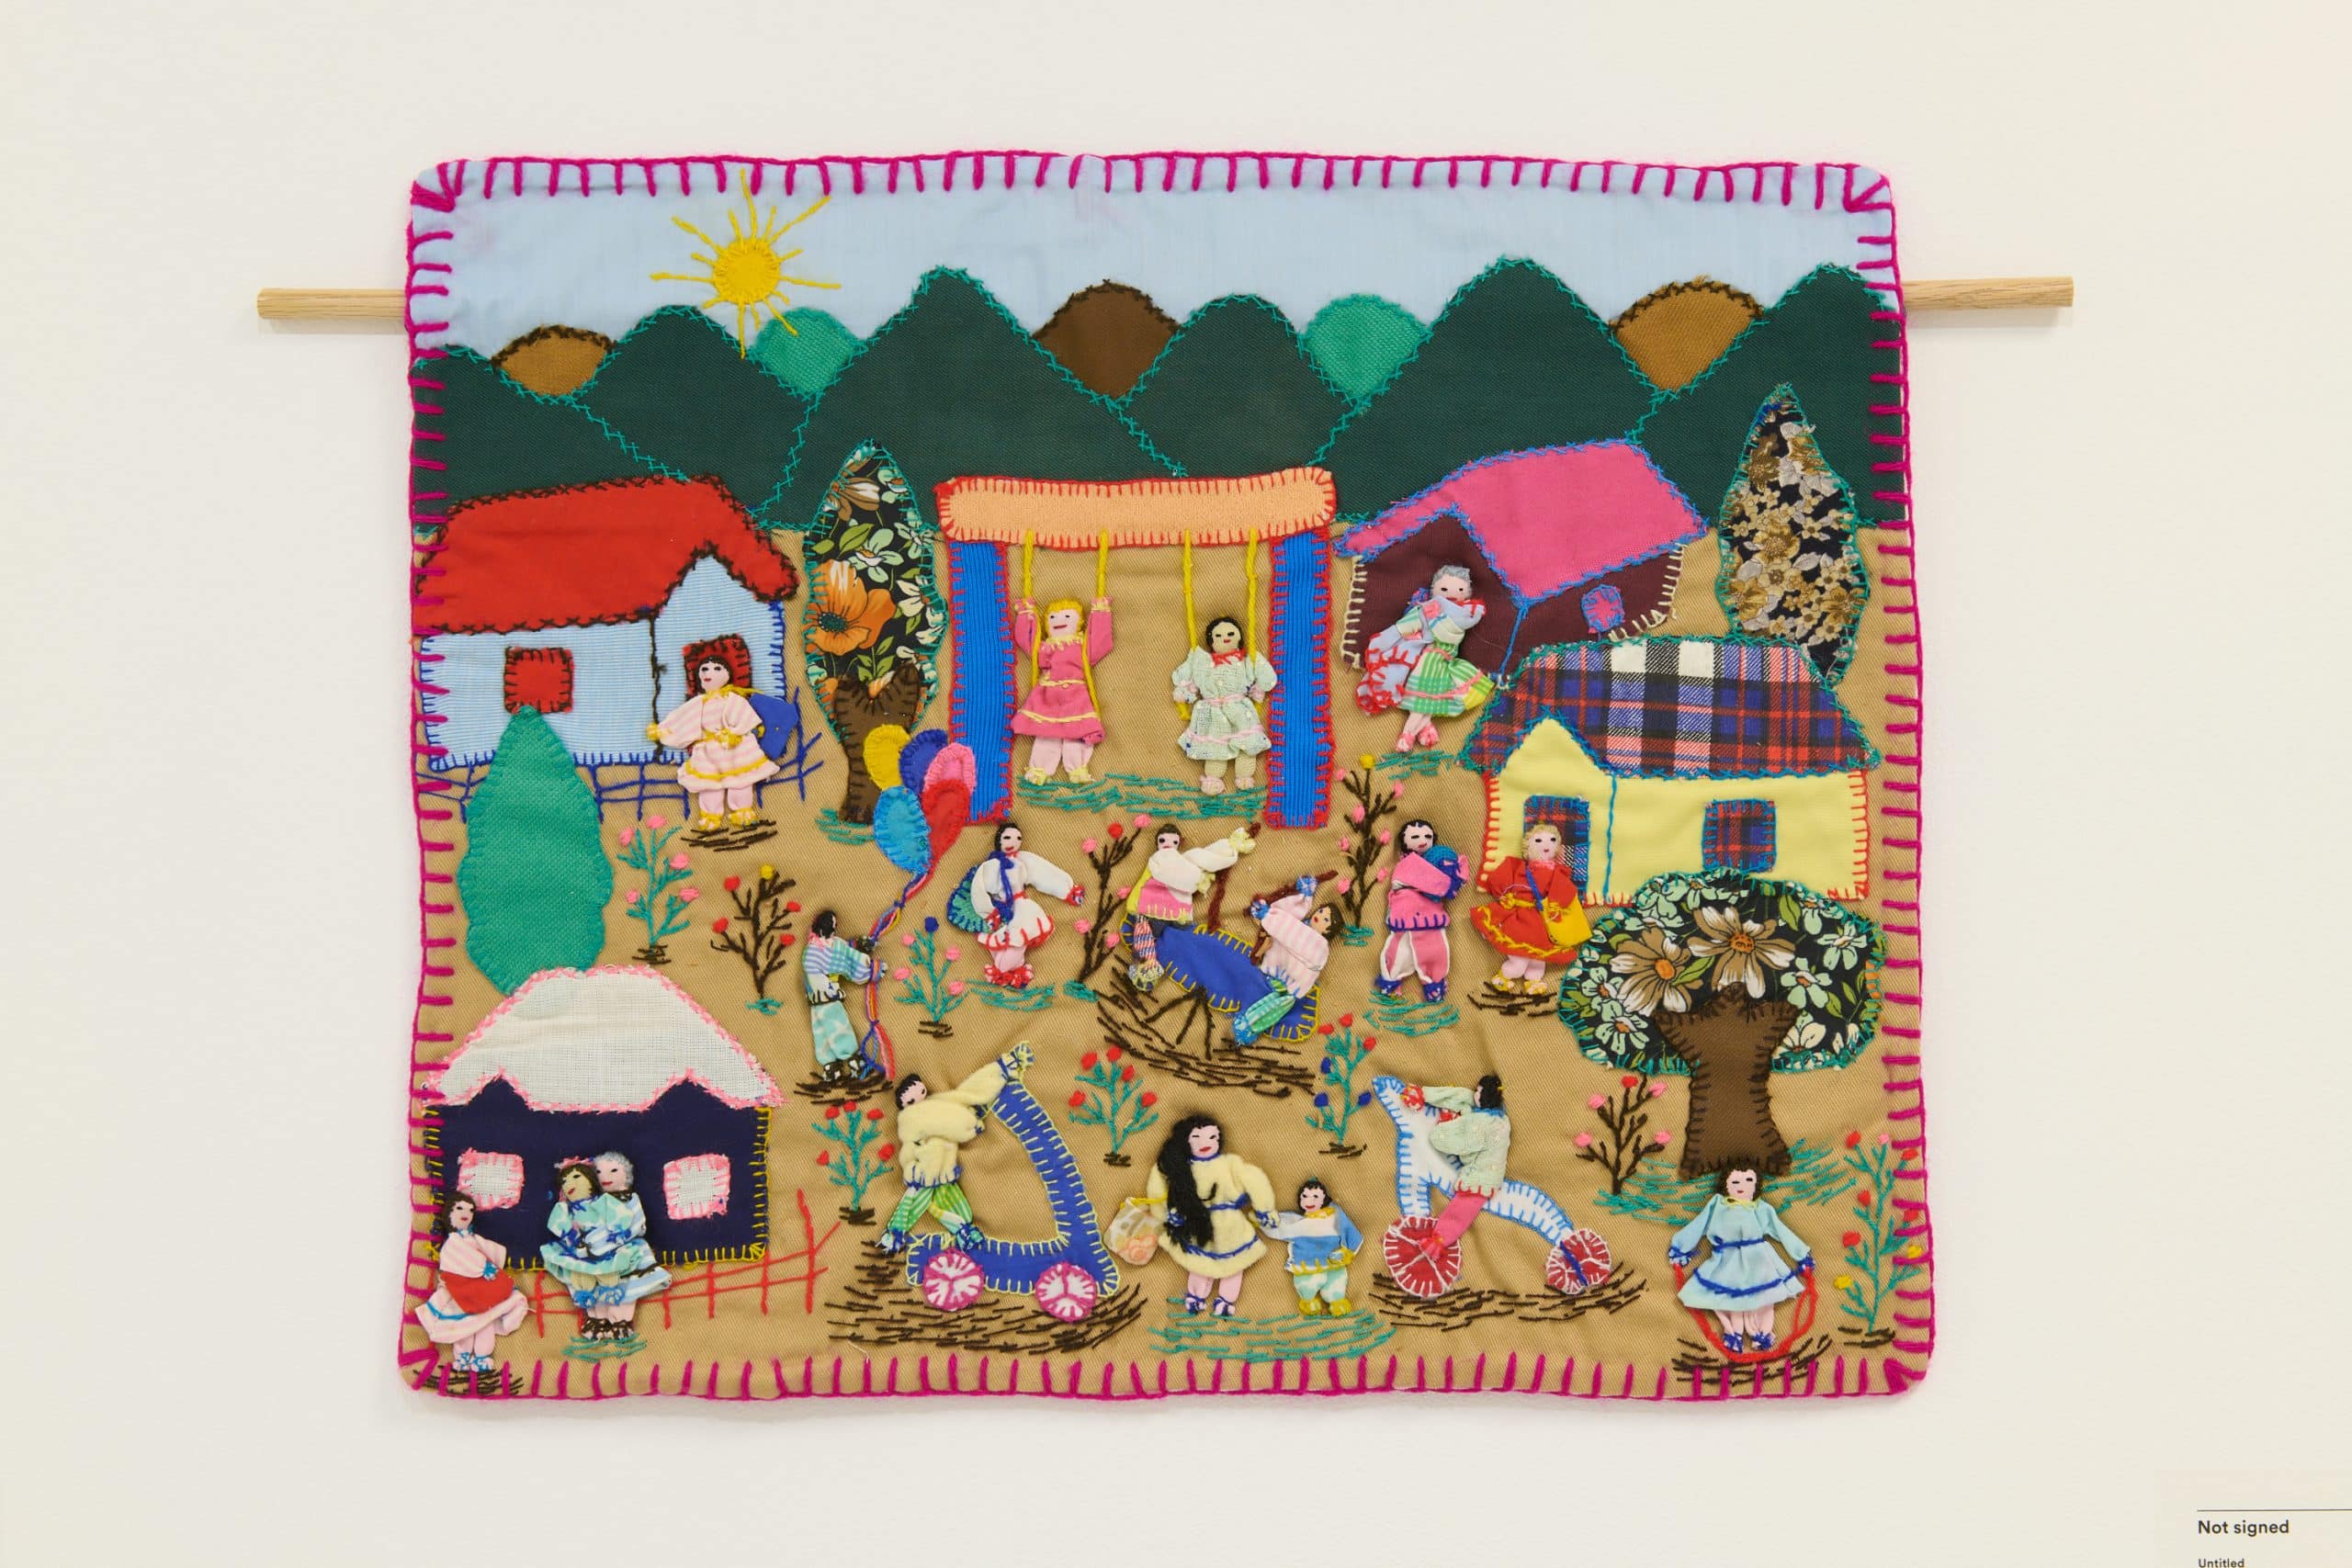 An arpillera depicting a colourful community scene with growing plants and children playing.